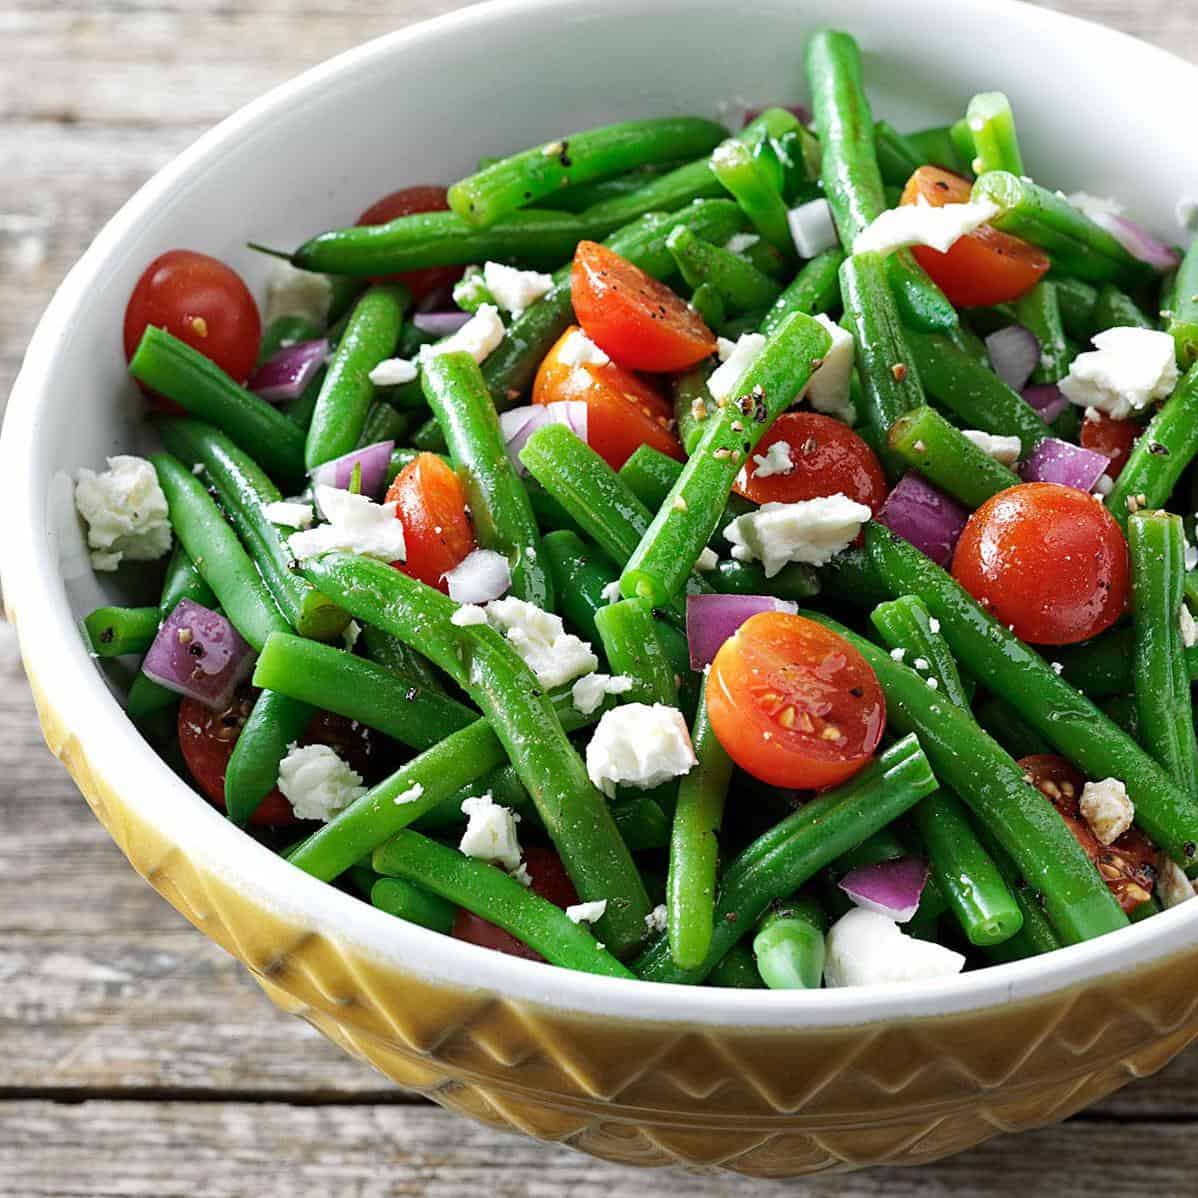  Fresh green beans are the star of this crisp and refreshing salad.